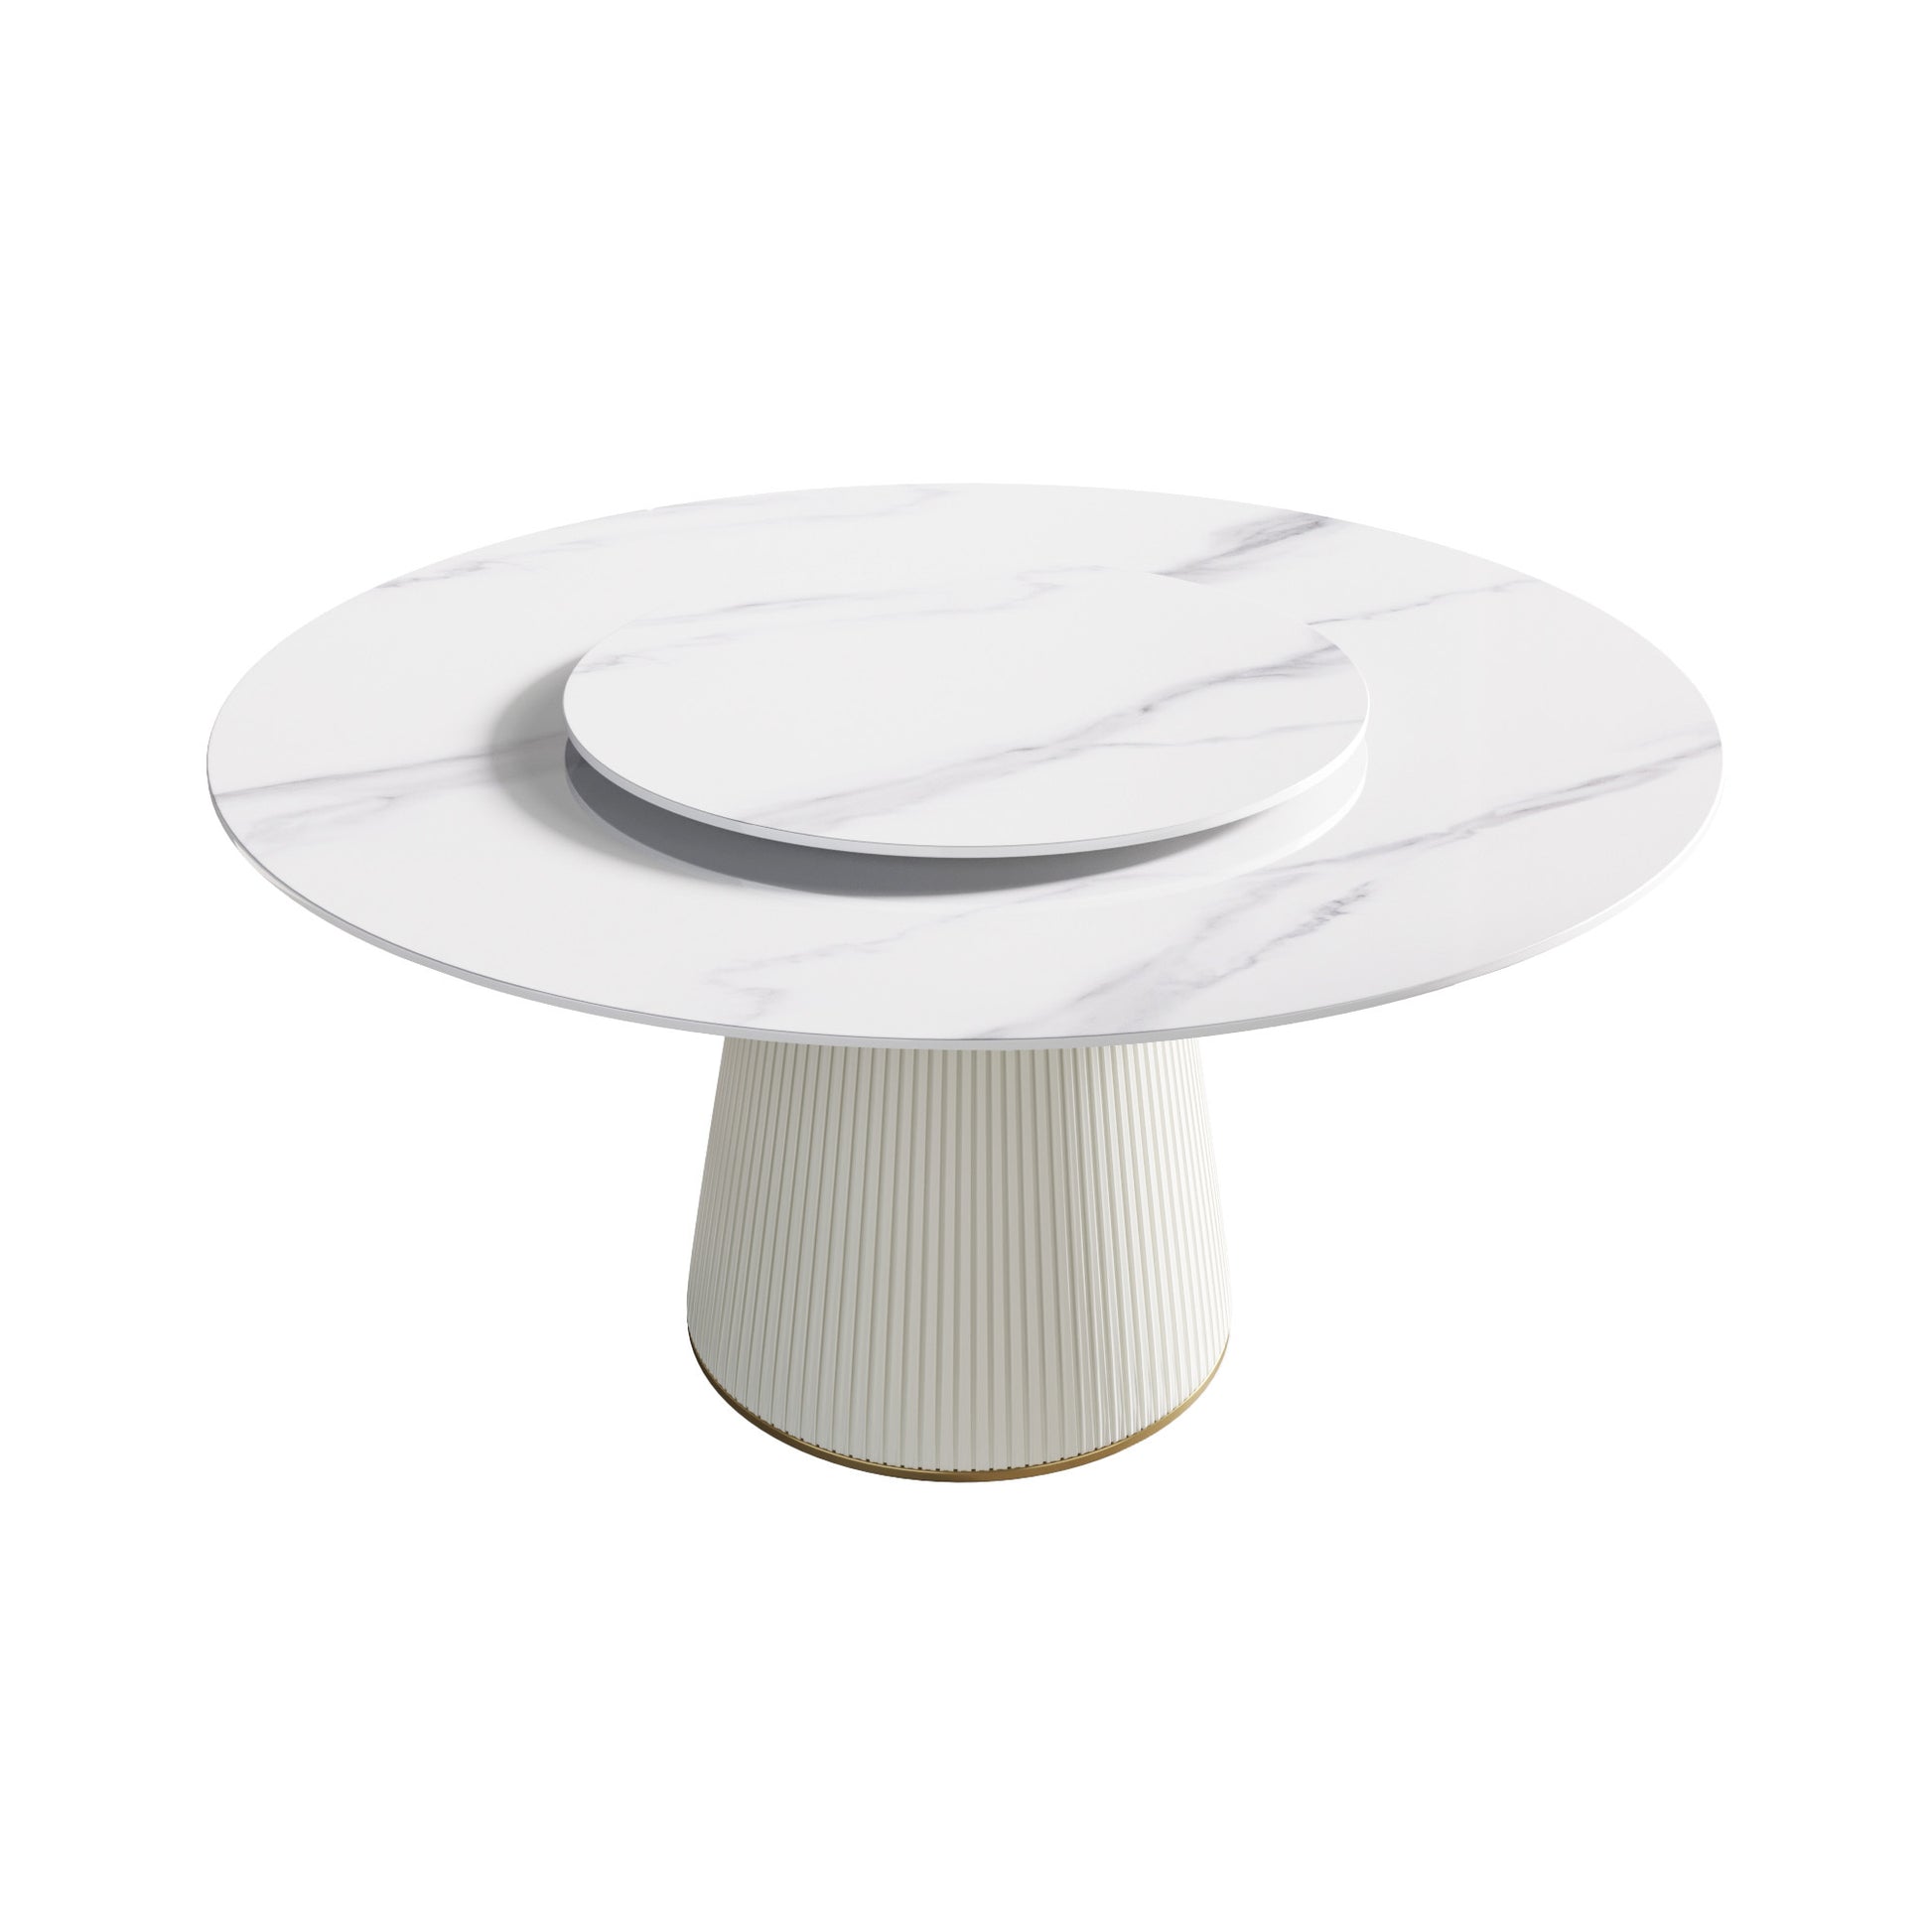 59.05 "Modern white artificial stone round beige white-dining room-plywood-sintered stone